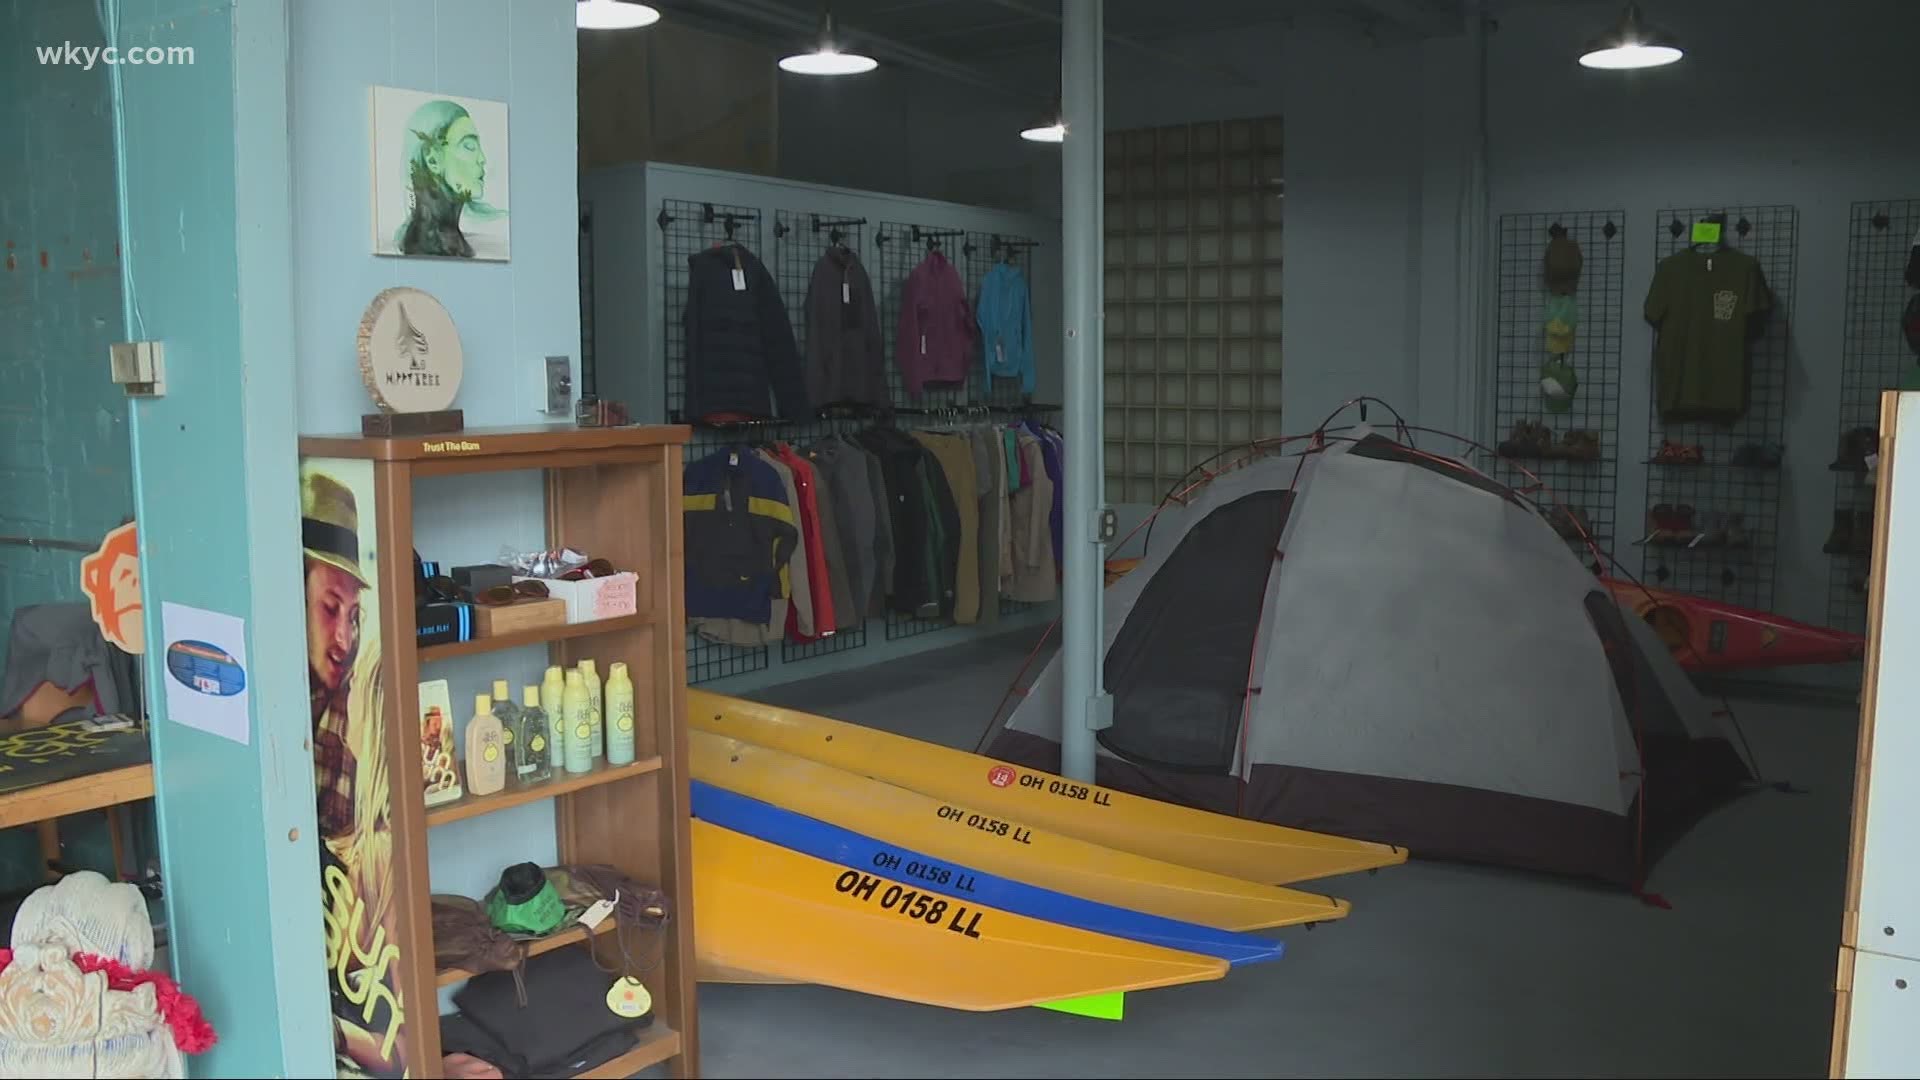 The new exchange store in Rocky River wants to make outdoor material more affordable. Amani Abraham reports.